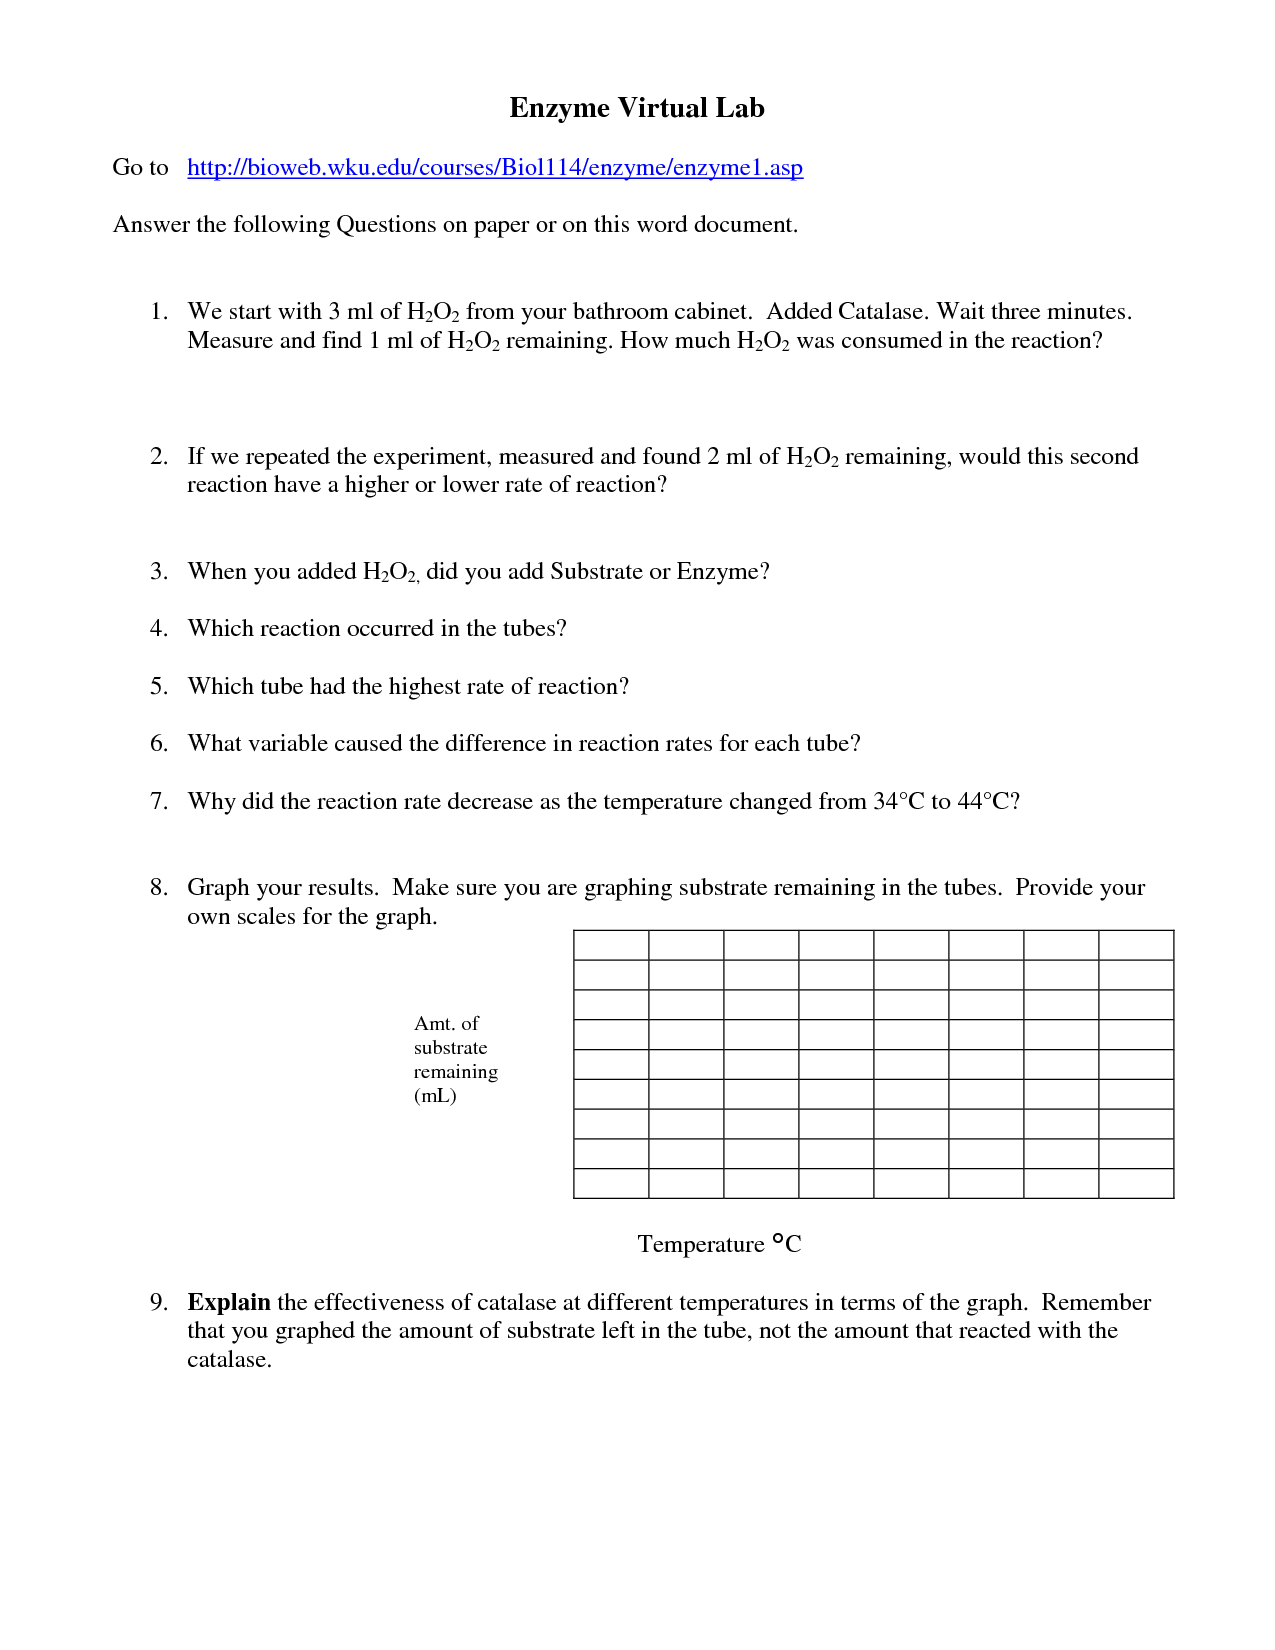 enzyme-reaction-rates-worksheet-answer-key-kidz-activities-worksheet-template-tips-and-reviews